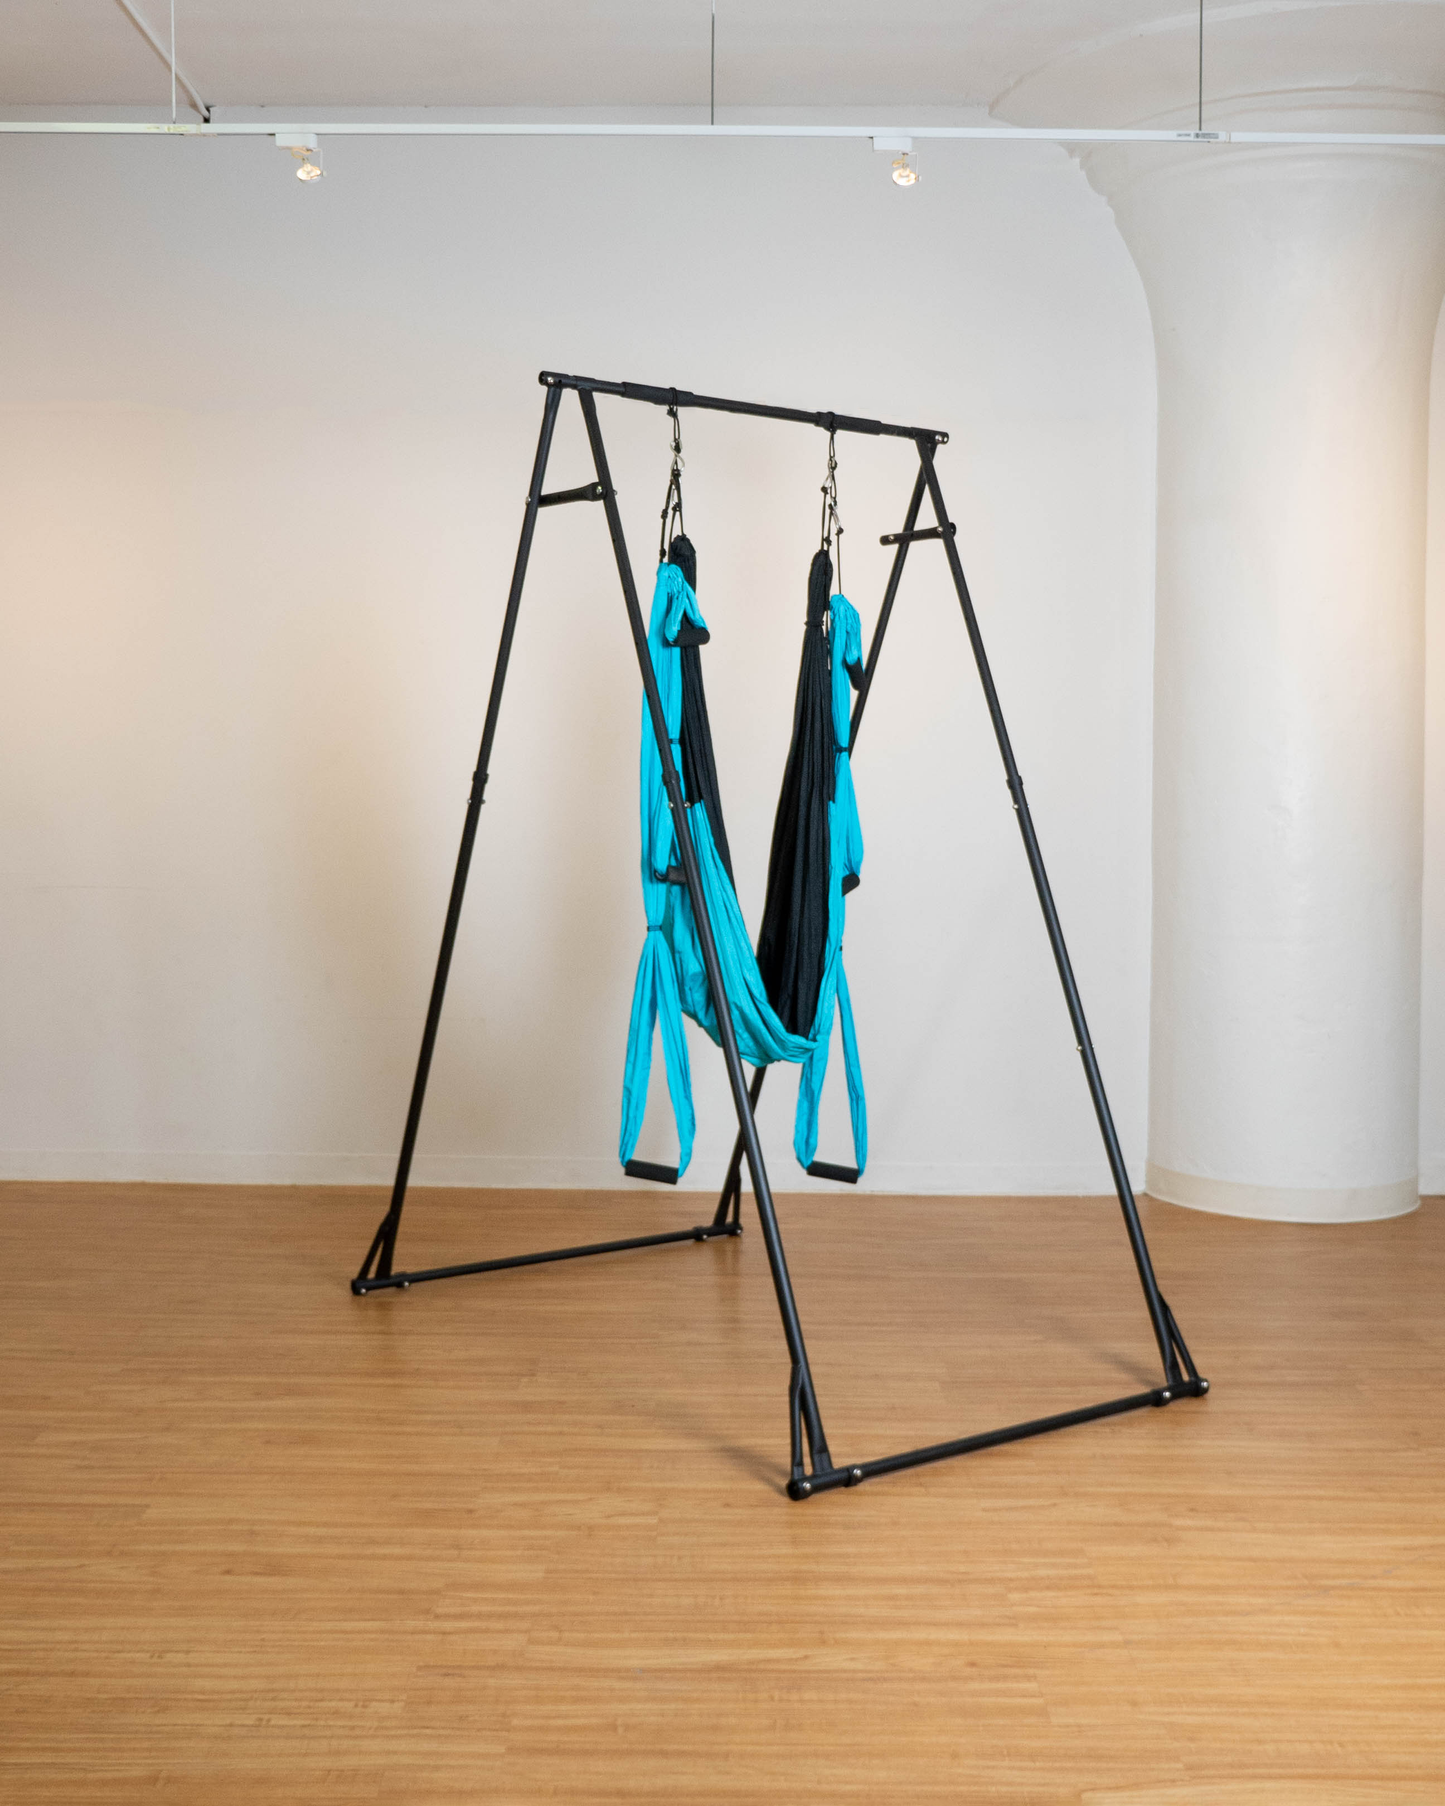 Suspension Stand & YogiGym Combo